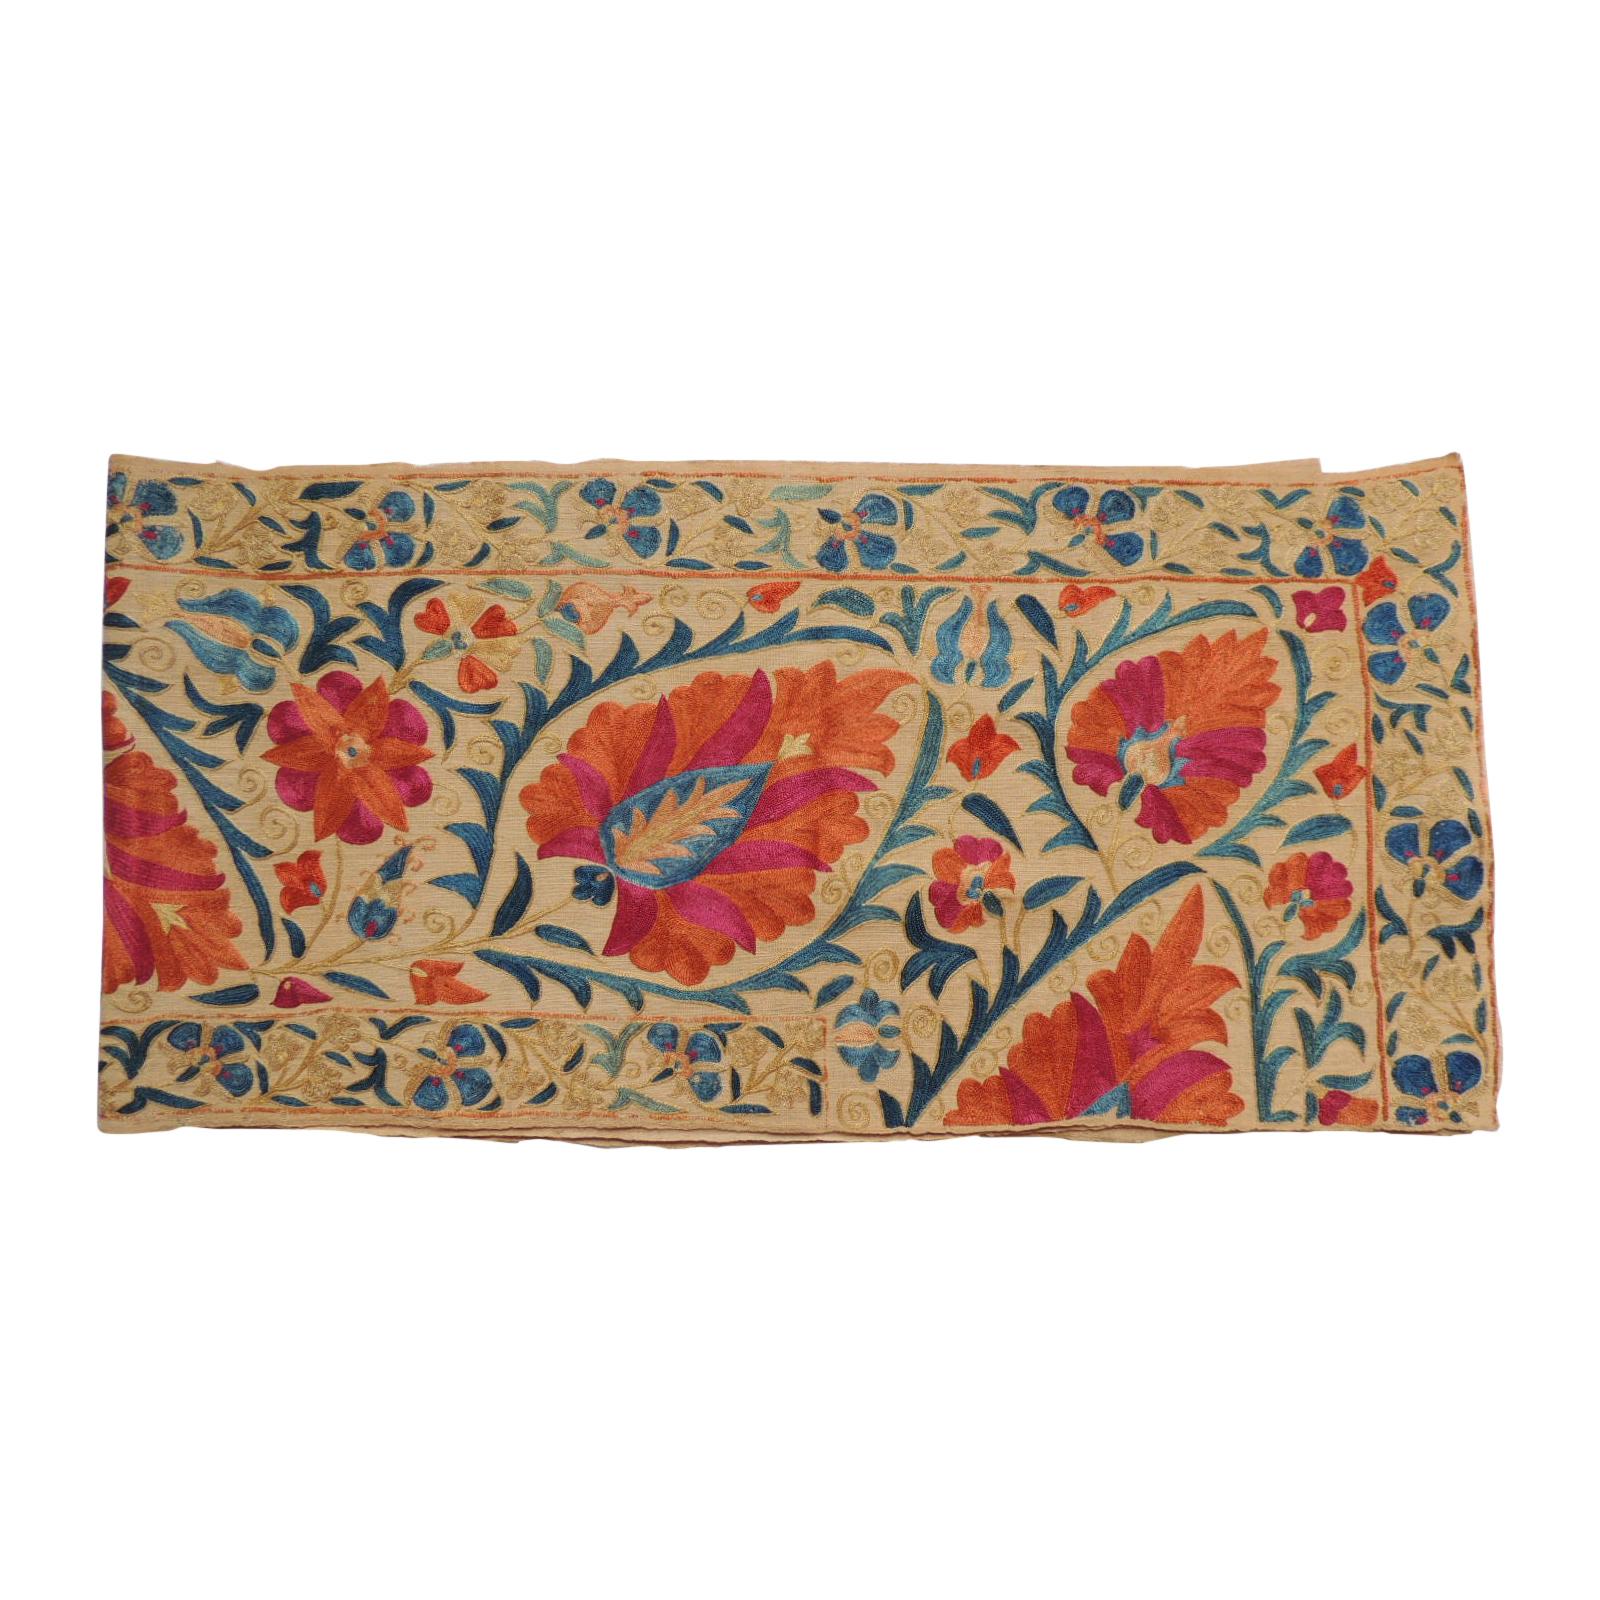 Antique Orange and Blue Long Suzani Table Runner